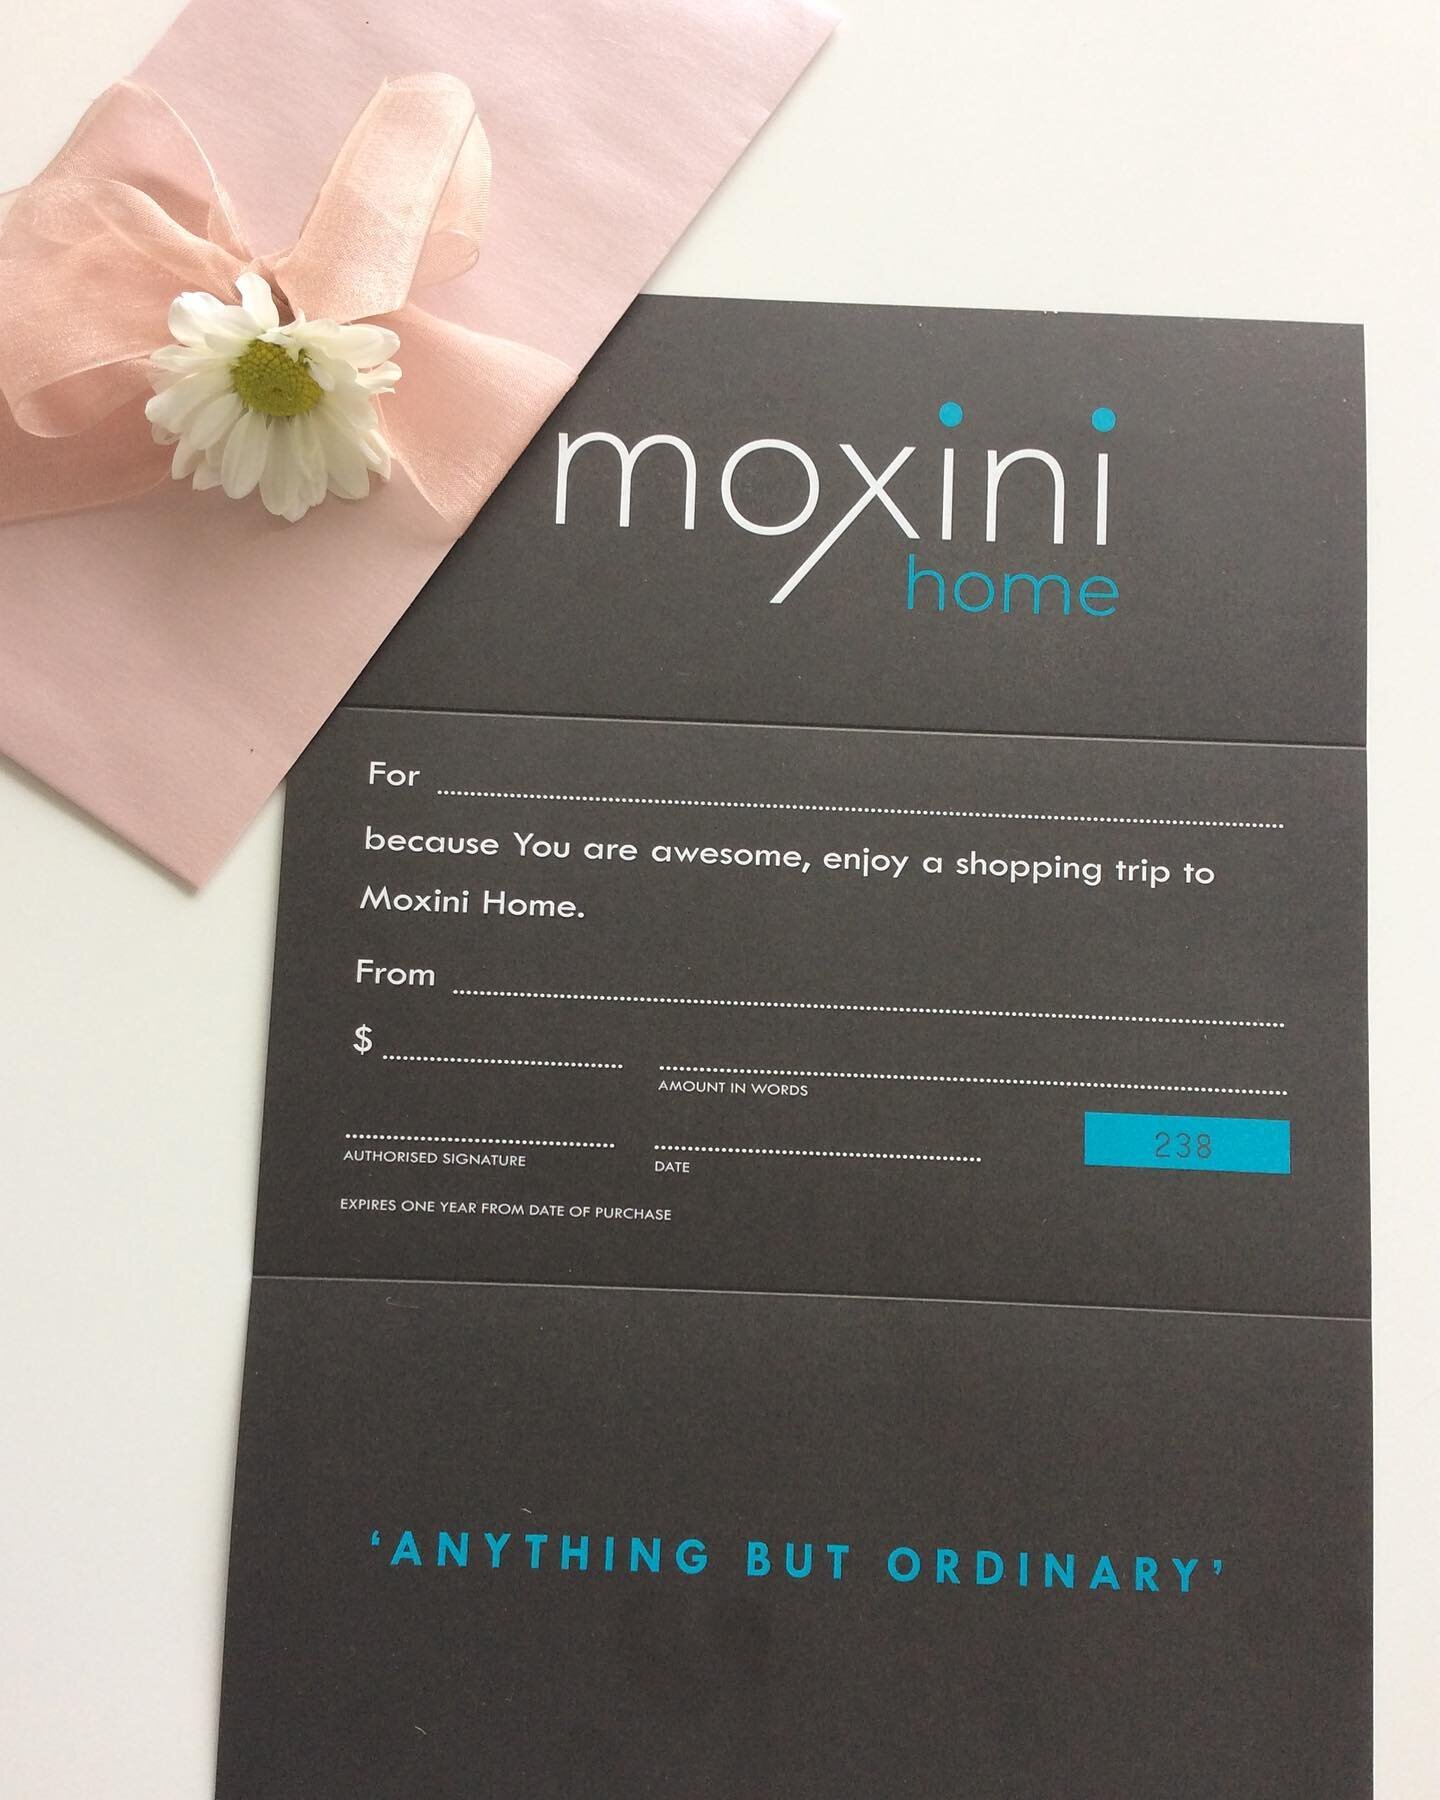 OK.. 1 more week till Mothers Day !!
How about a gift voucher for mum ???
Either message us on Facebook or email us at home@moxini.co.nz for info.
#supportsmallbusiness #smallbusiness #greatgifts #giftideas #mothersday #mothersdaygiftideas #moxiniint